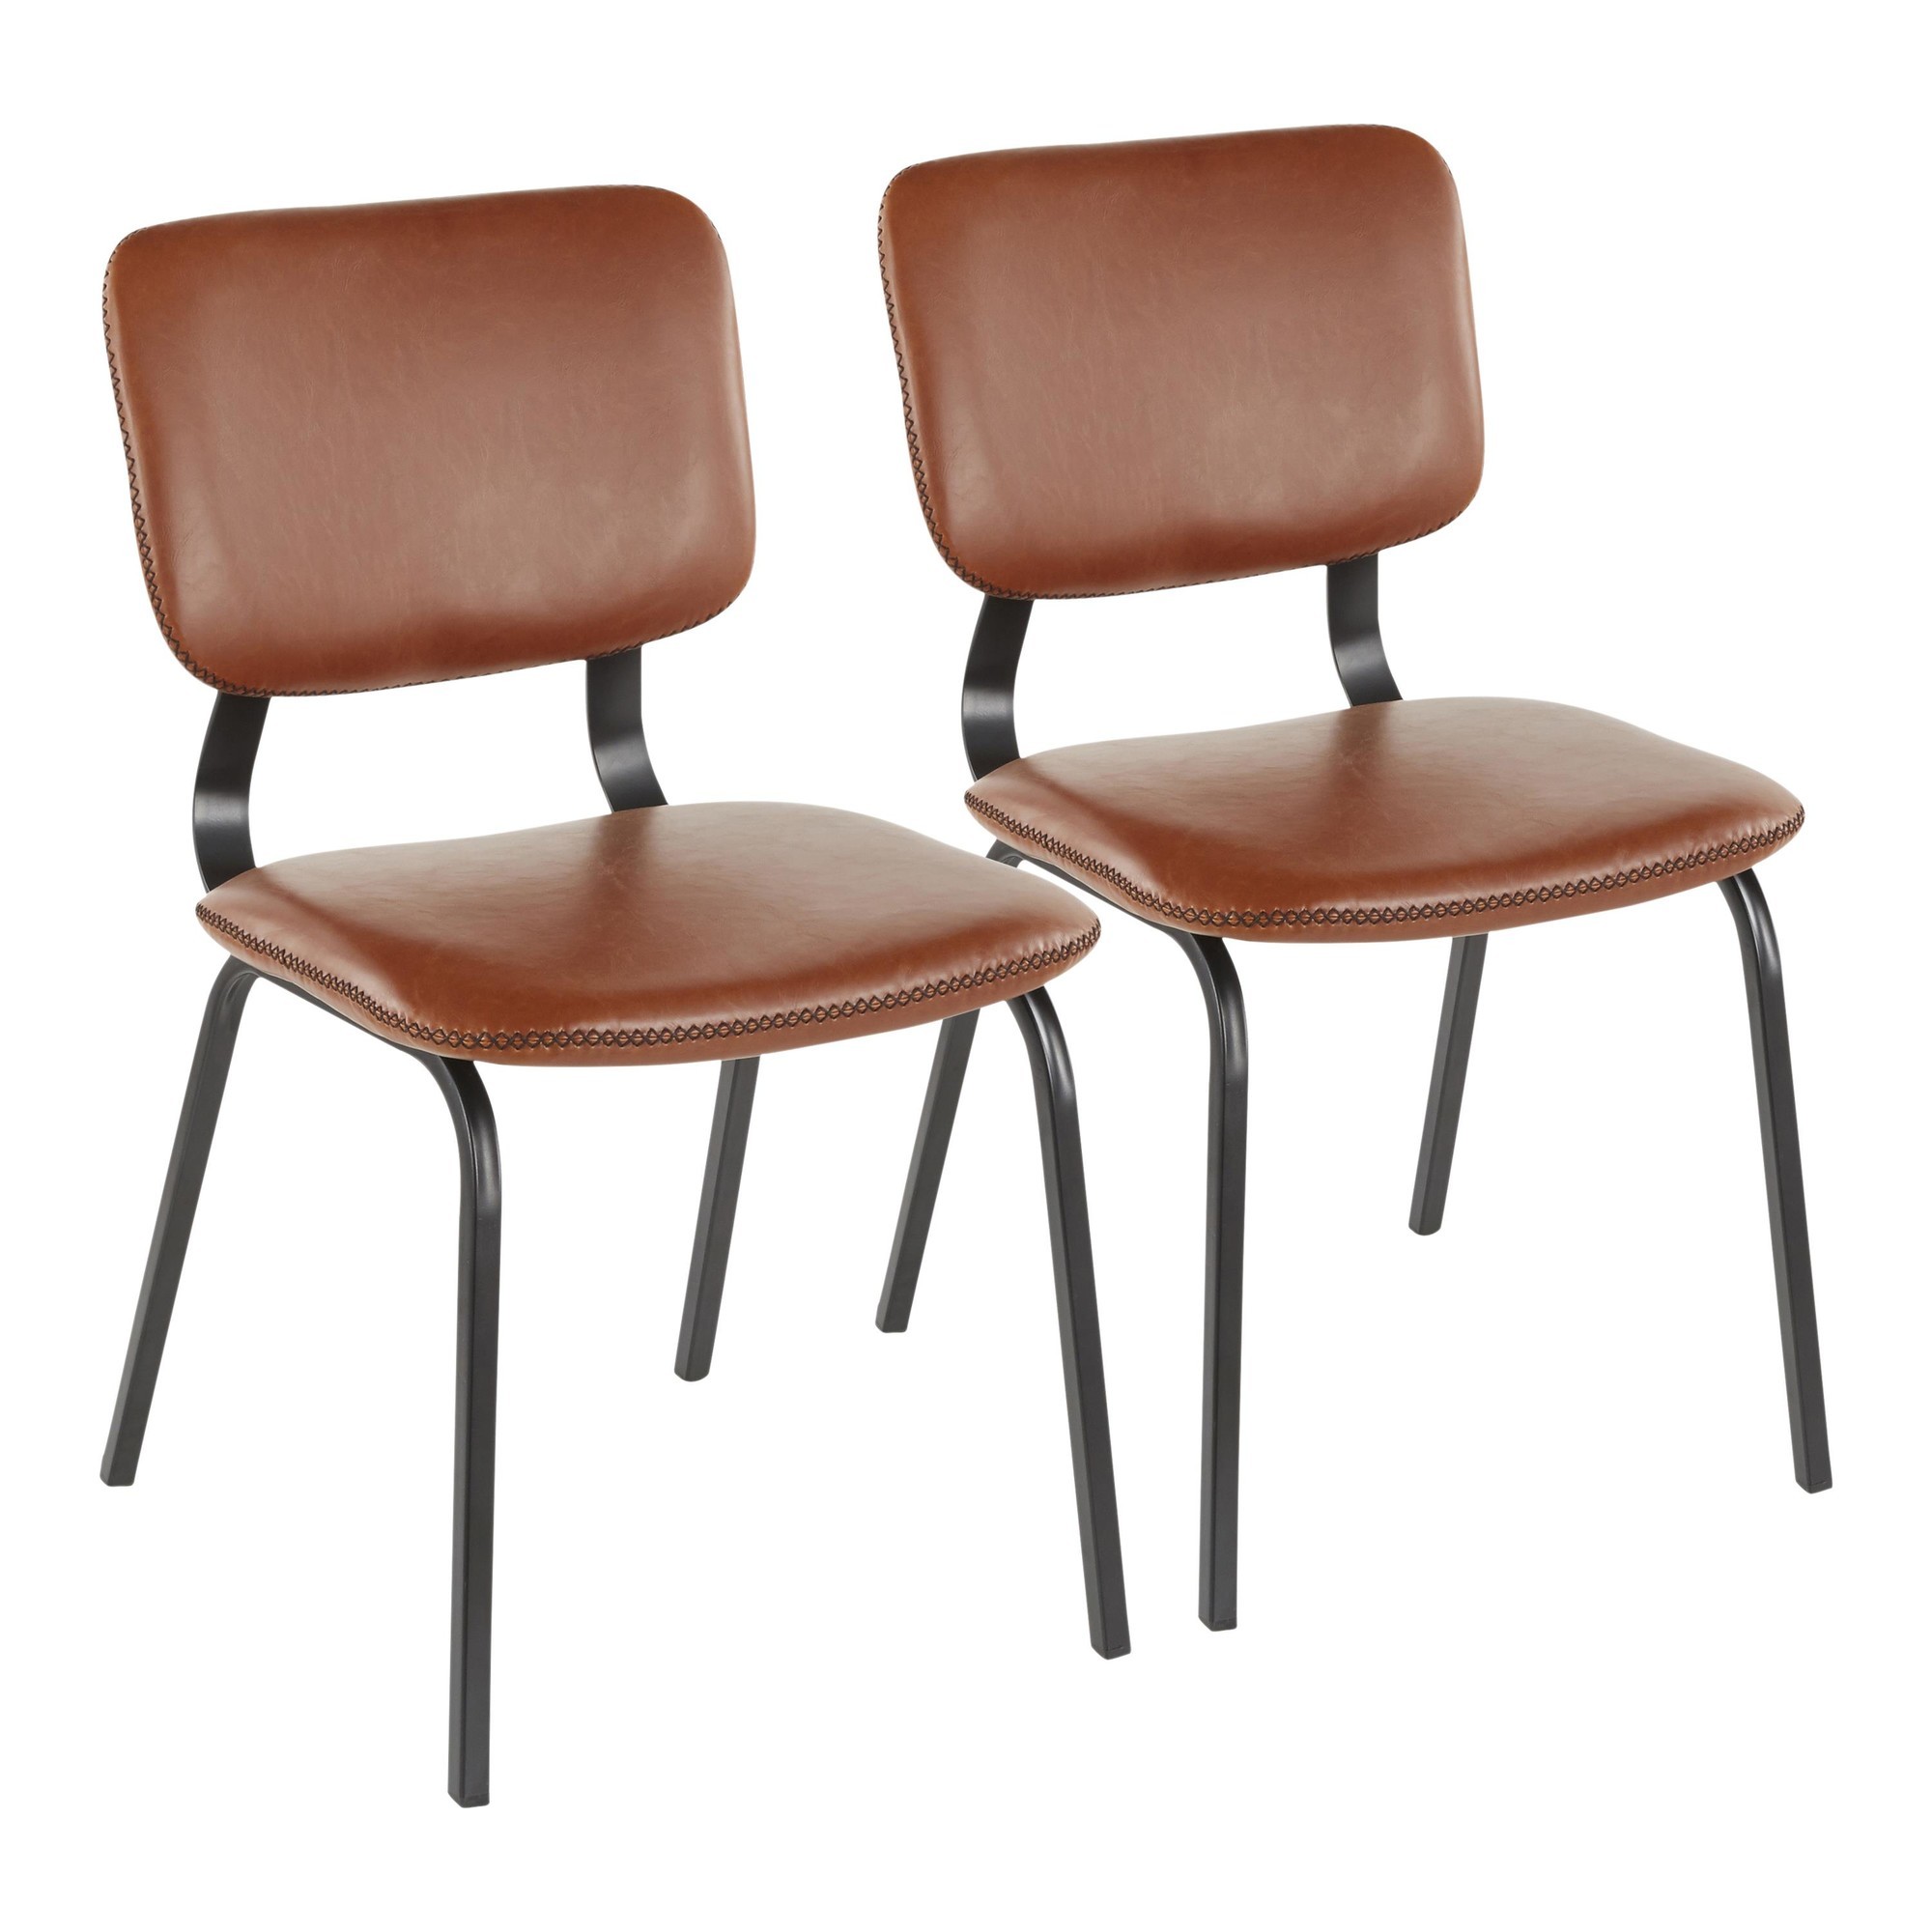 Foundry Chair - Set Of 2